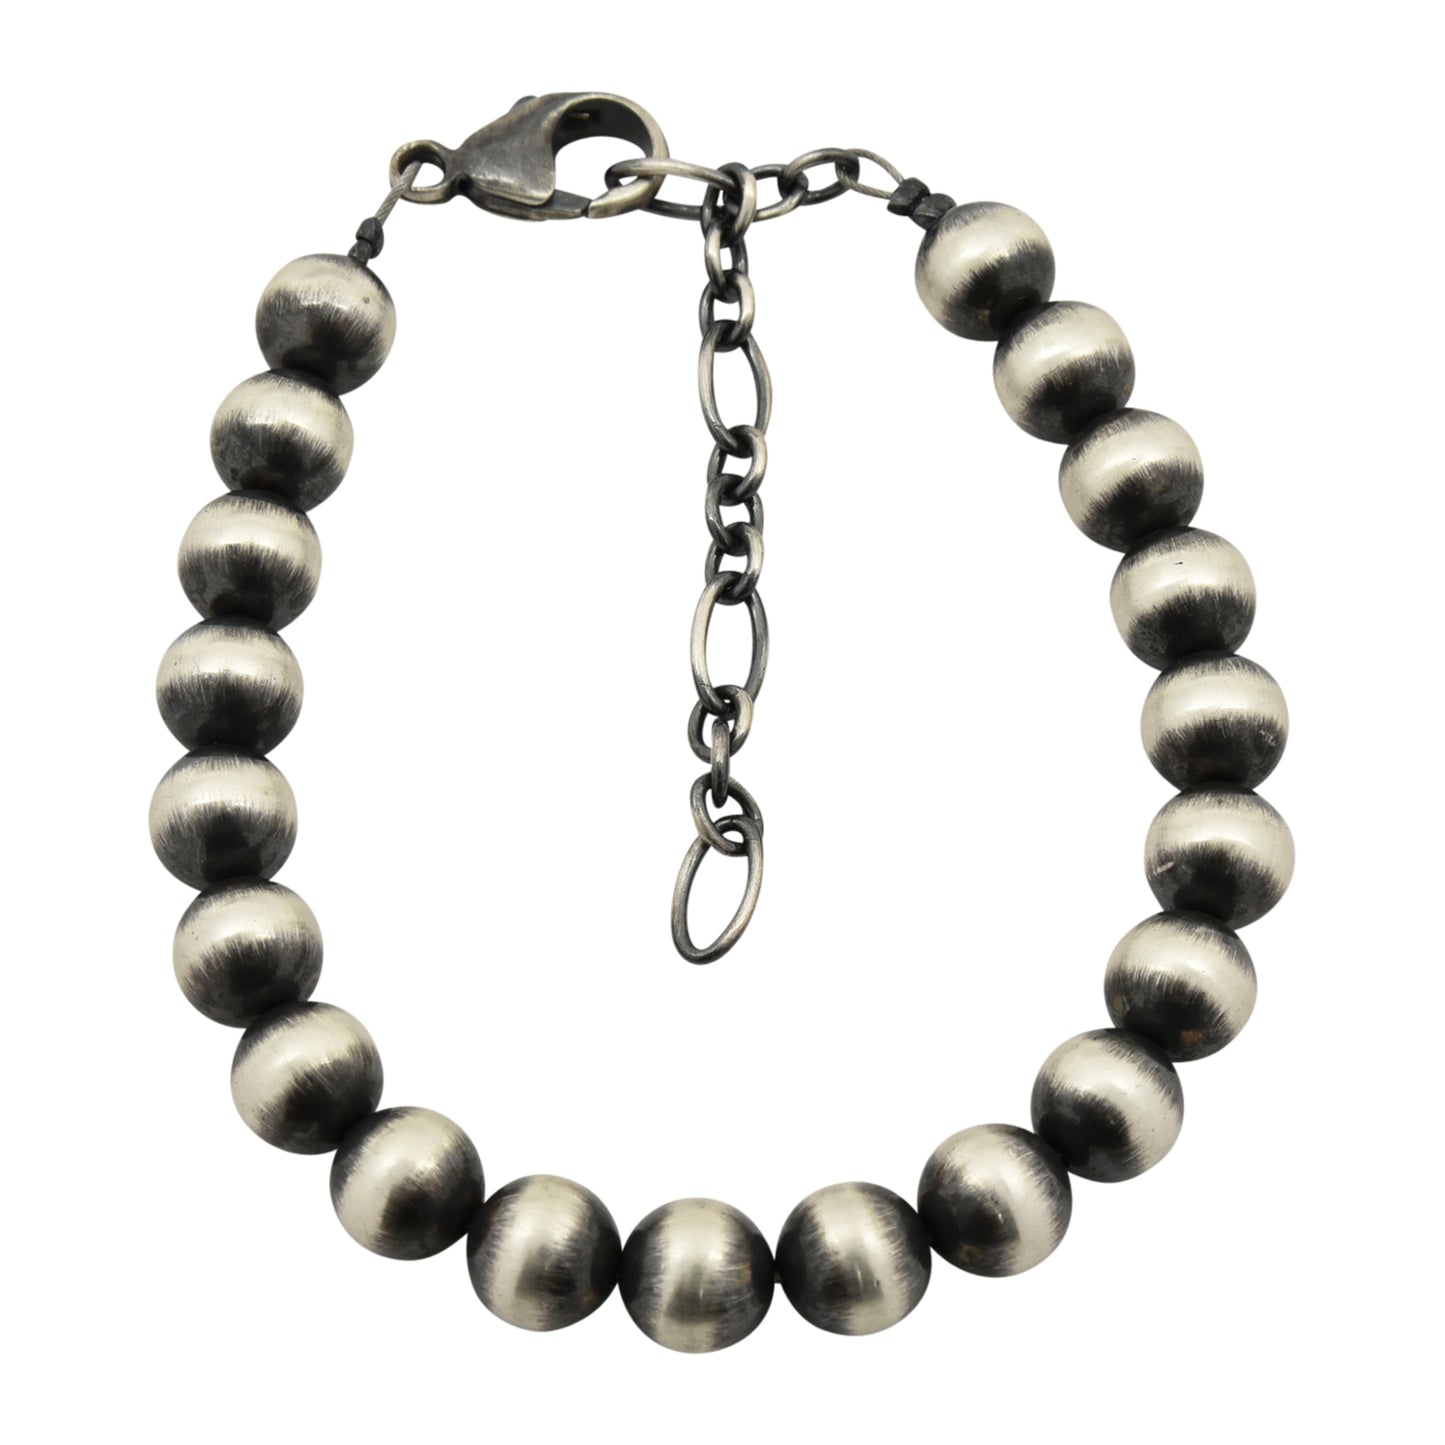 Sterling Silver Navajo Pearl Oxidize Bead Bracelet w/ Extender Chain. Available from 3mm to 12mm